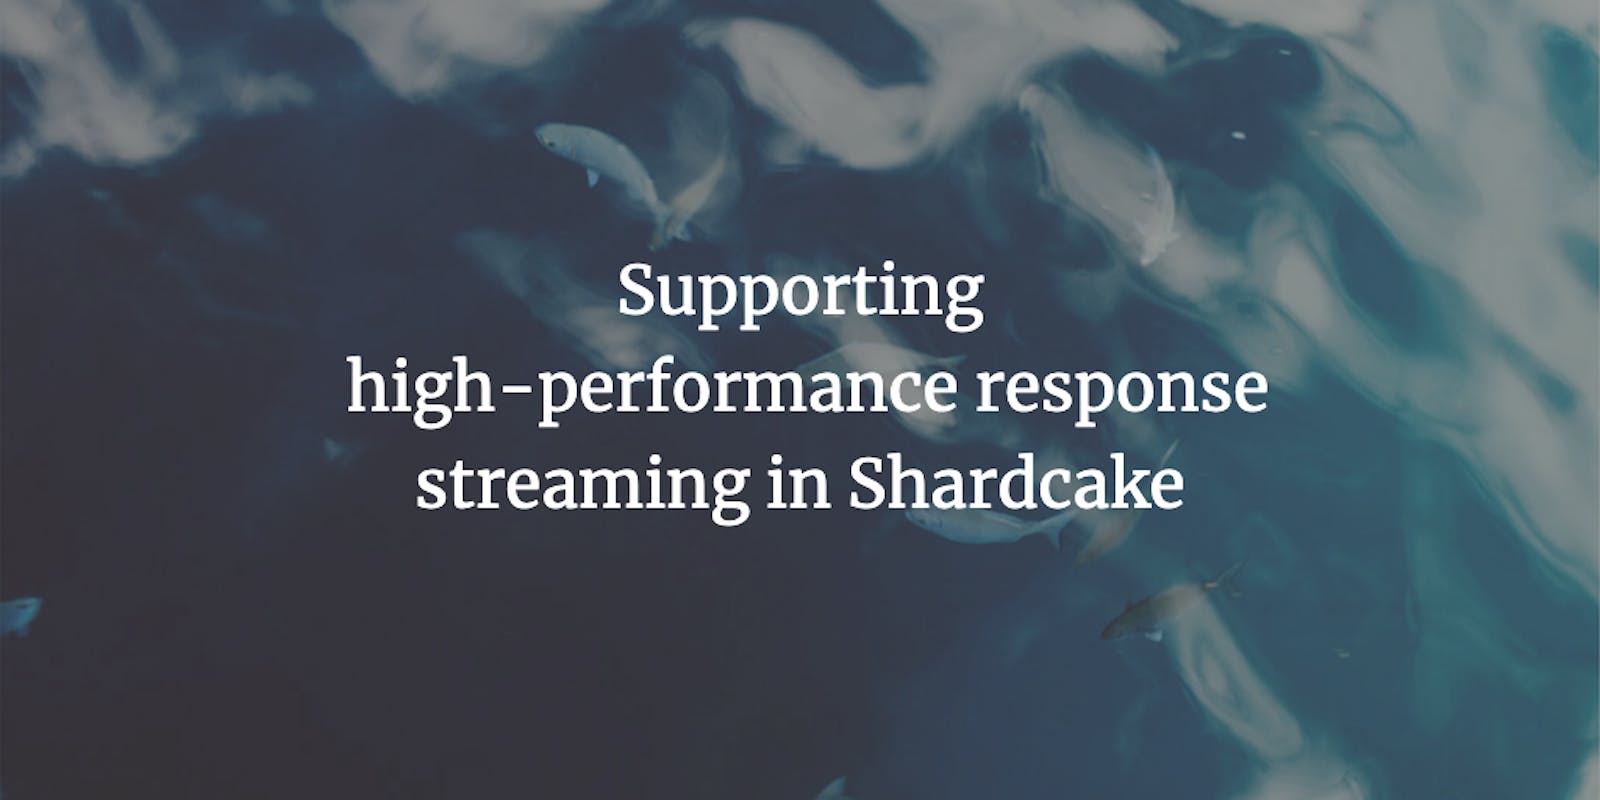 Supporting high-performance response streaming in Shardcake